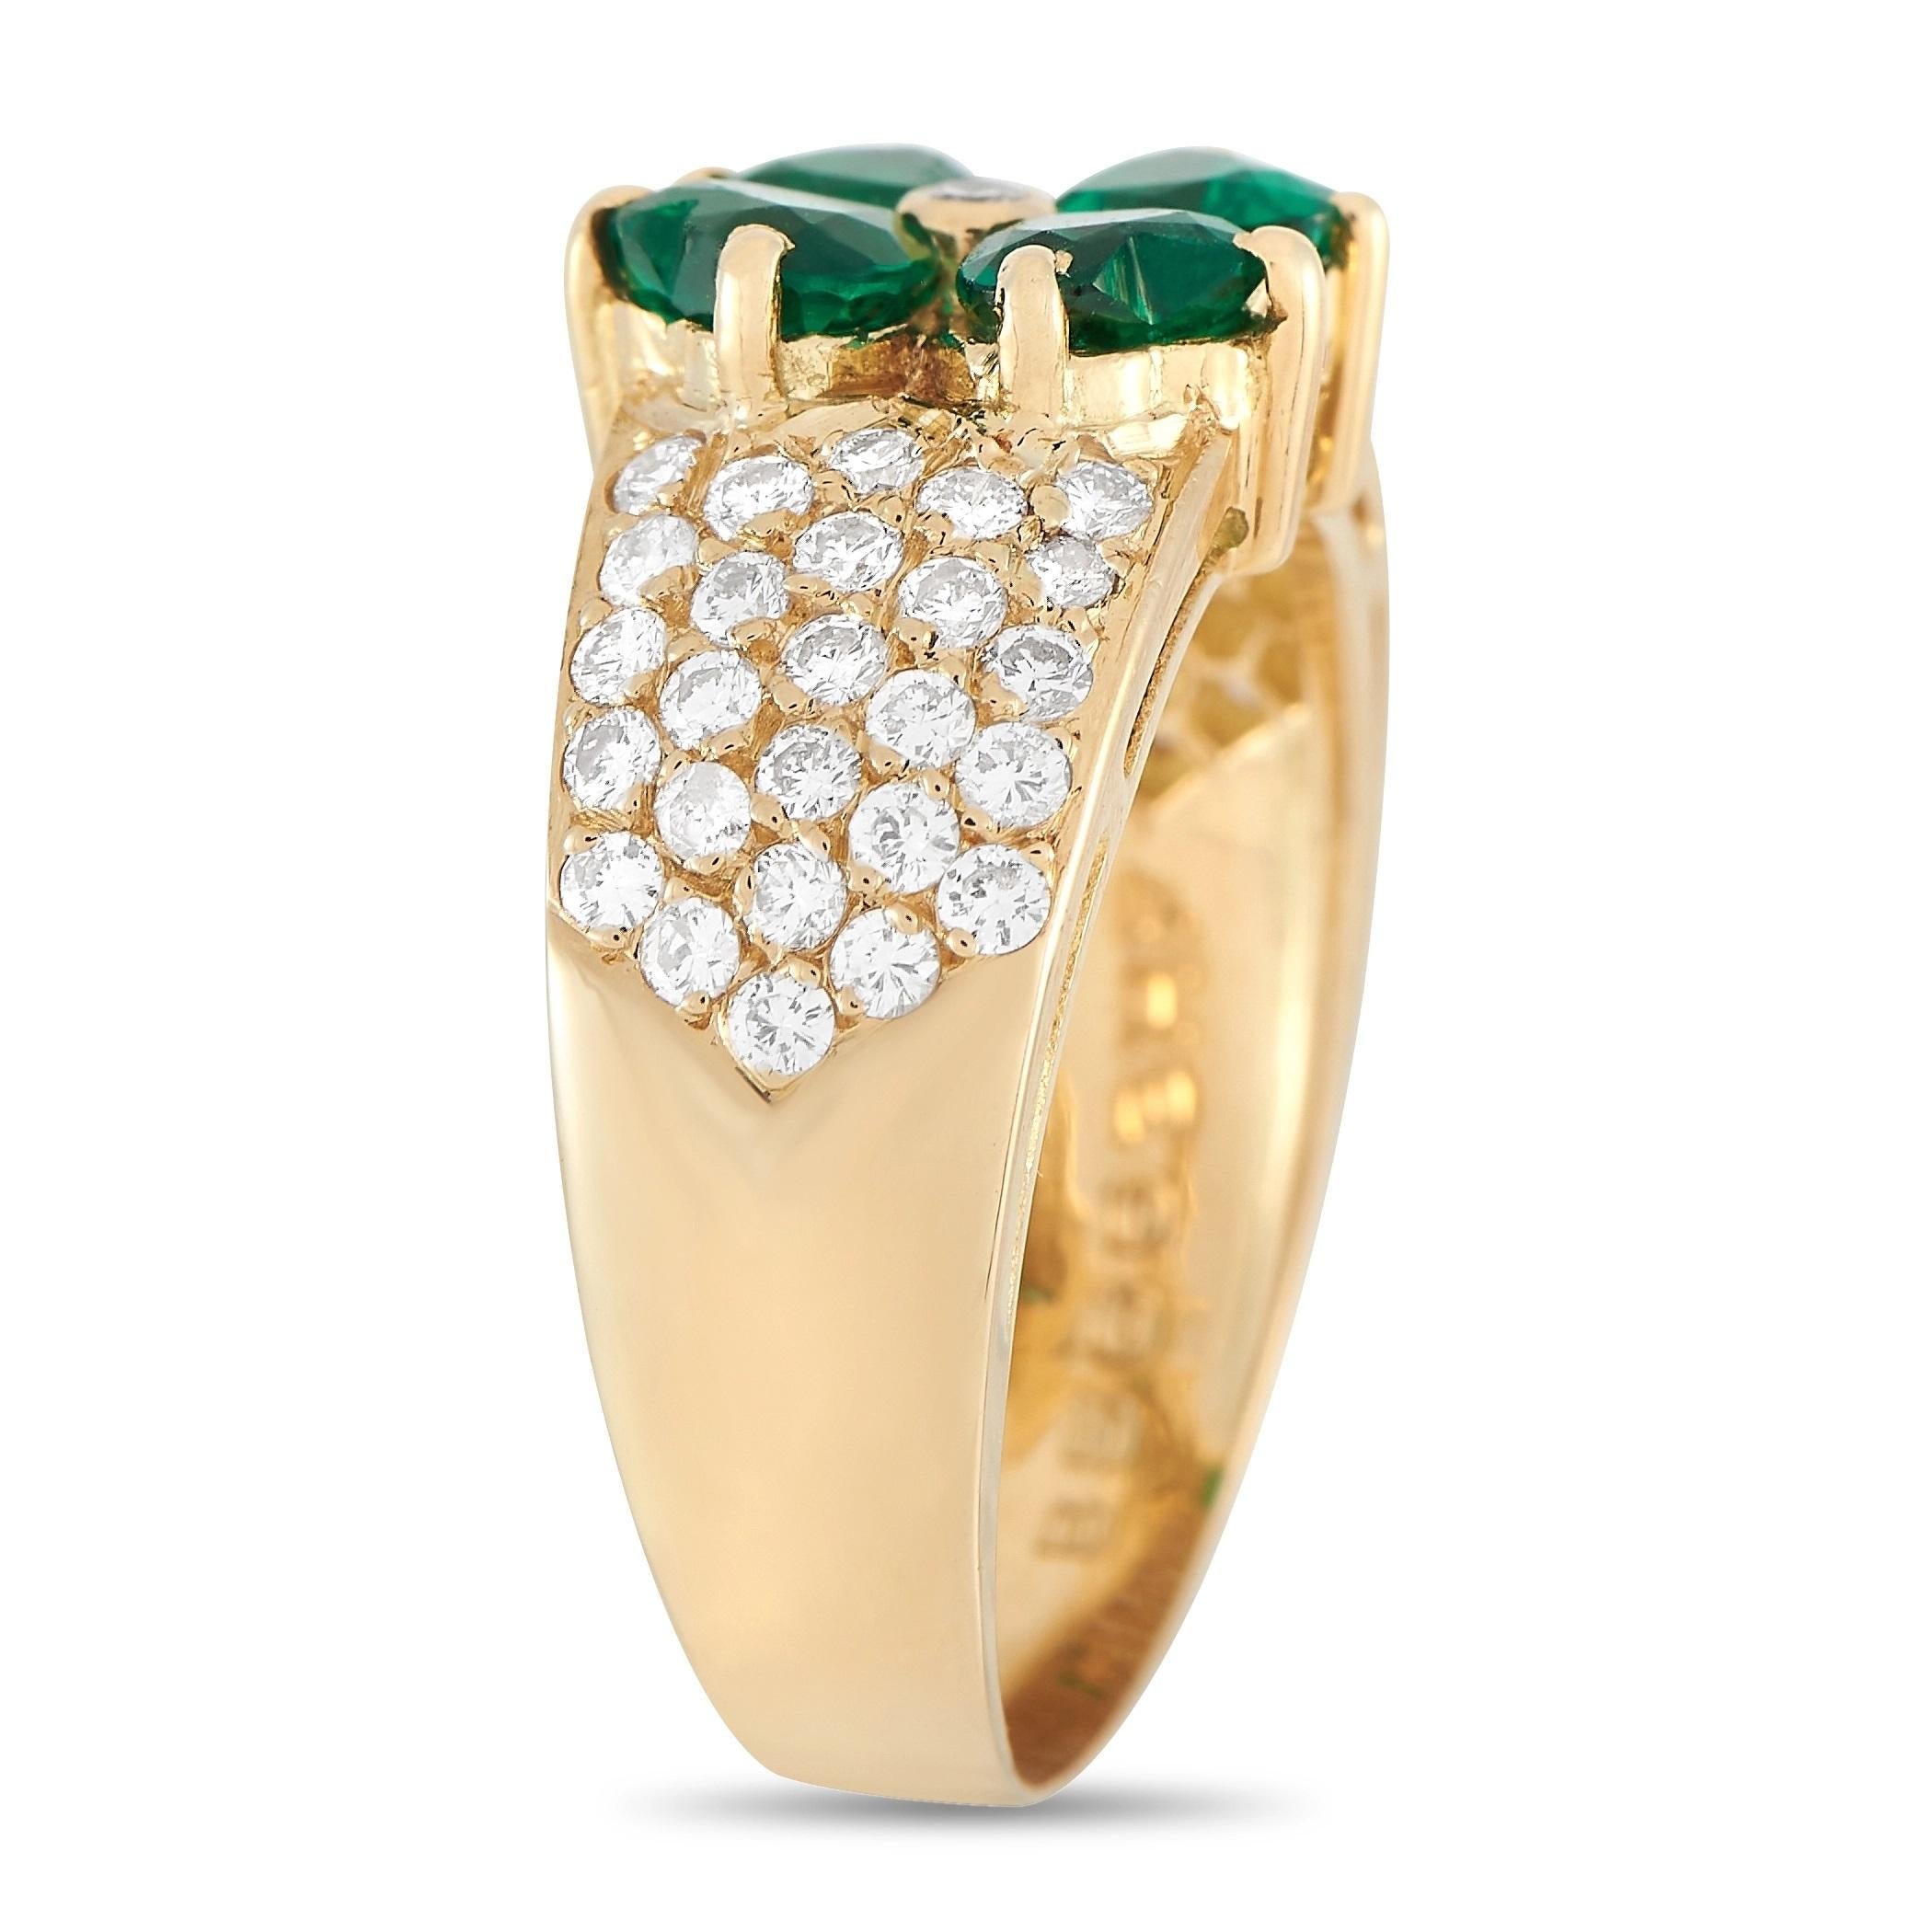 This ring from the Van Cleef & Arpels Antoinette collection is incredibly charming. At the center of the 18K Yellow Gold band, you’ll find four heart-shaped emeralds totaling 1.10 carats arranged to resemble a four-leaf clover. Diamonds with a total